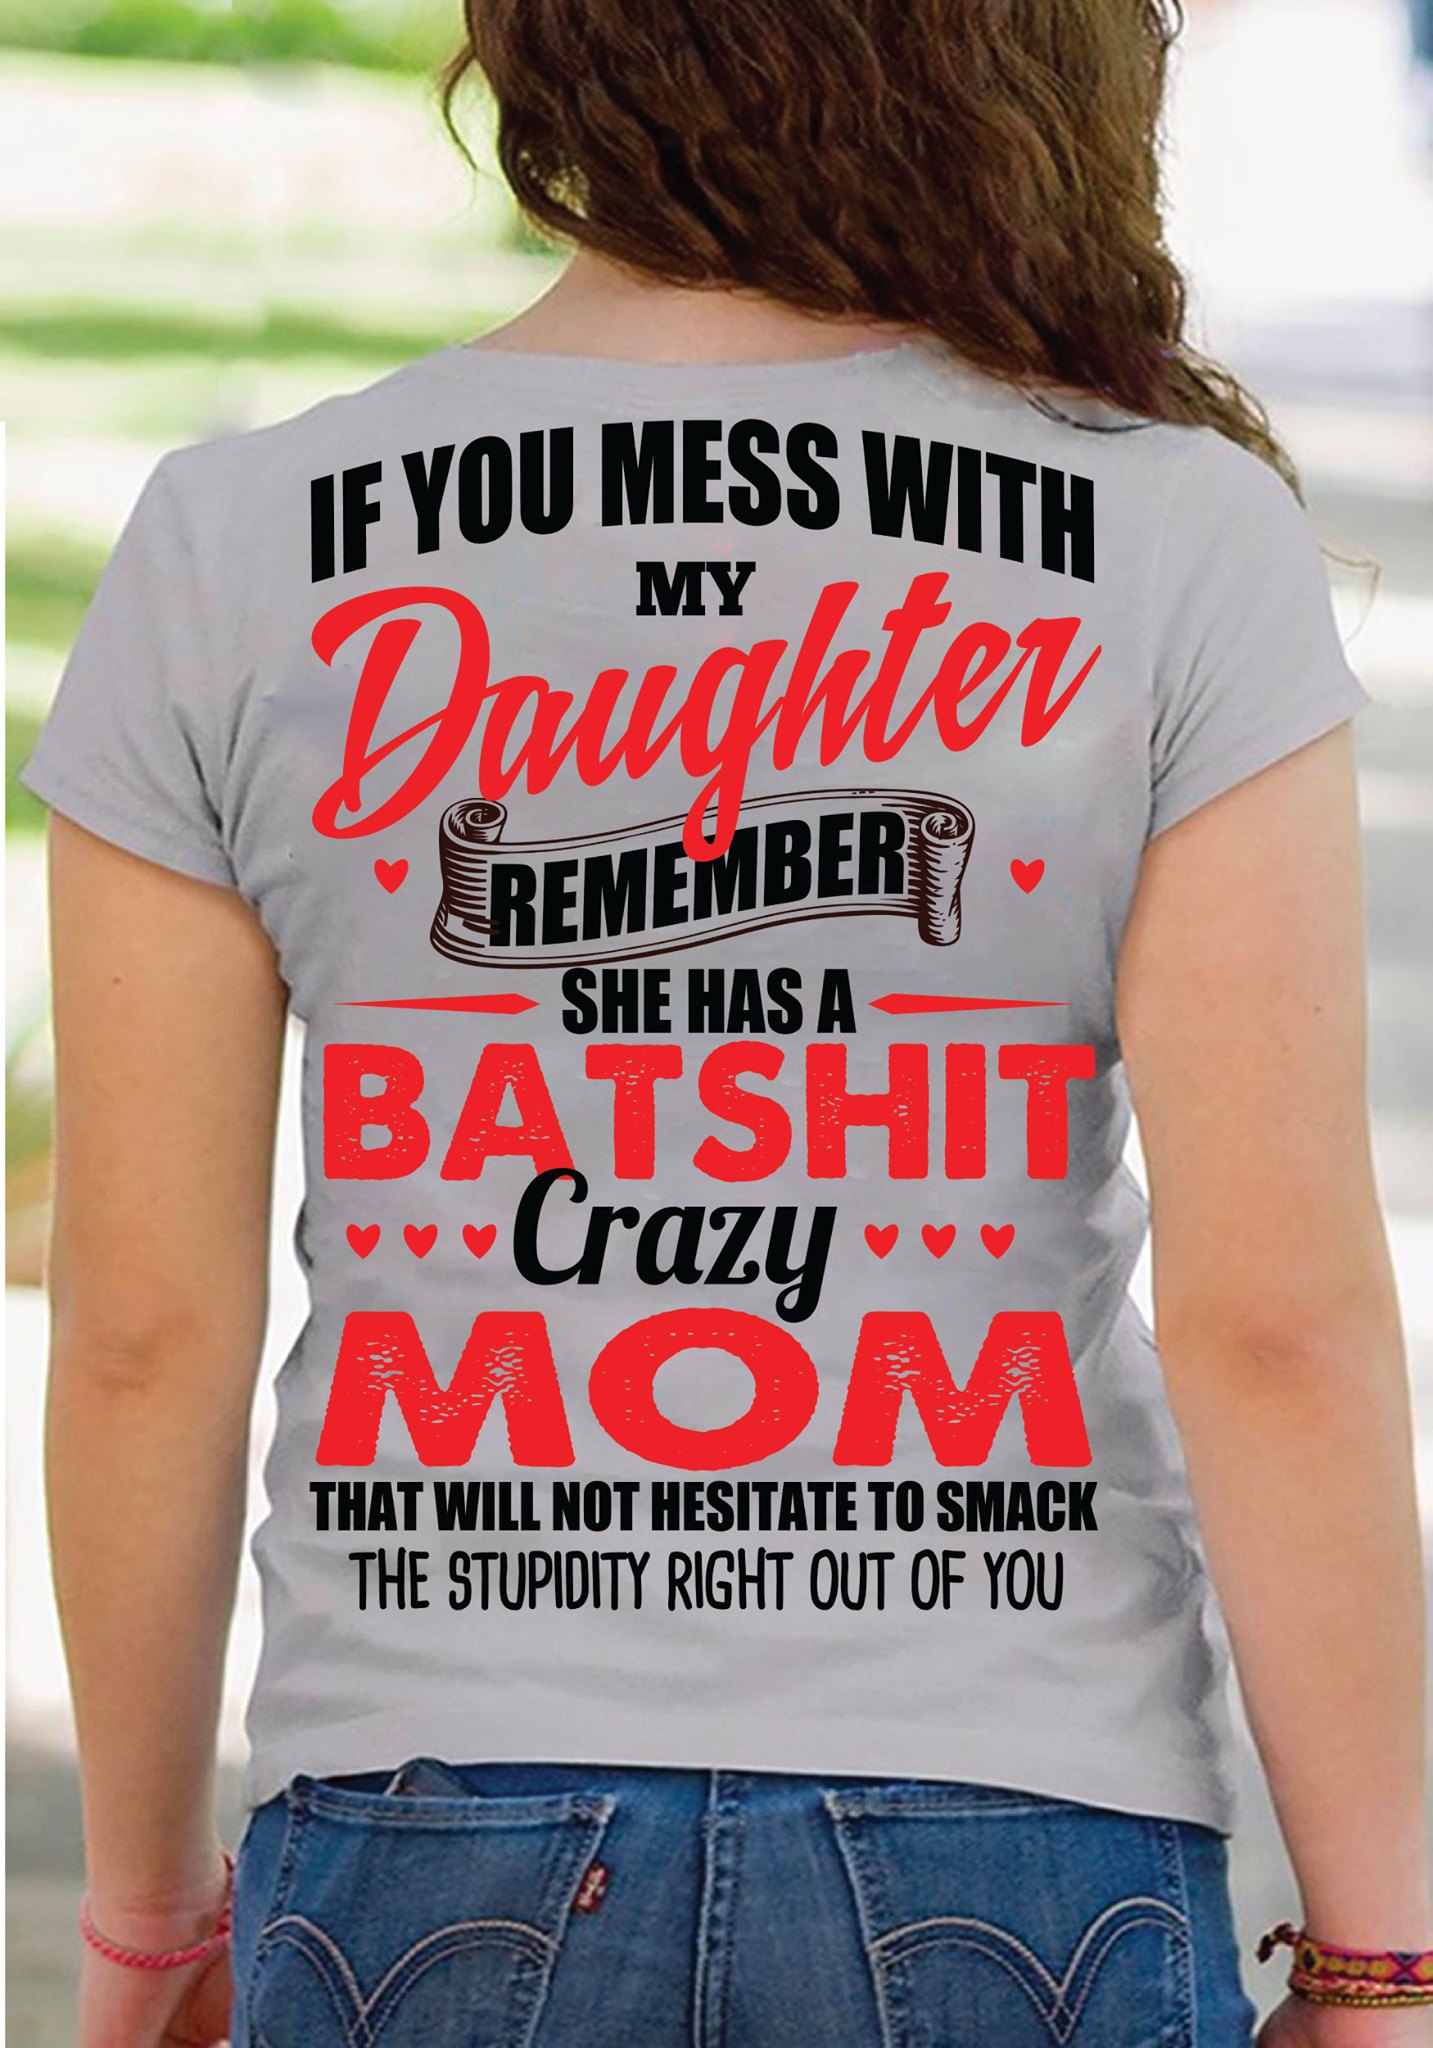 If you mess with my daughter remember she has a batshit crazy mom that will not hesitate to smack the stupidity right out of you